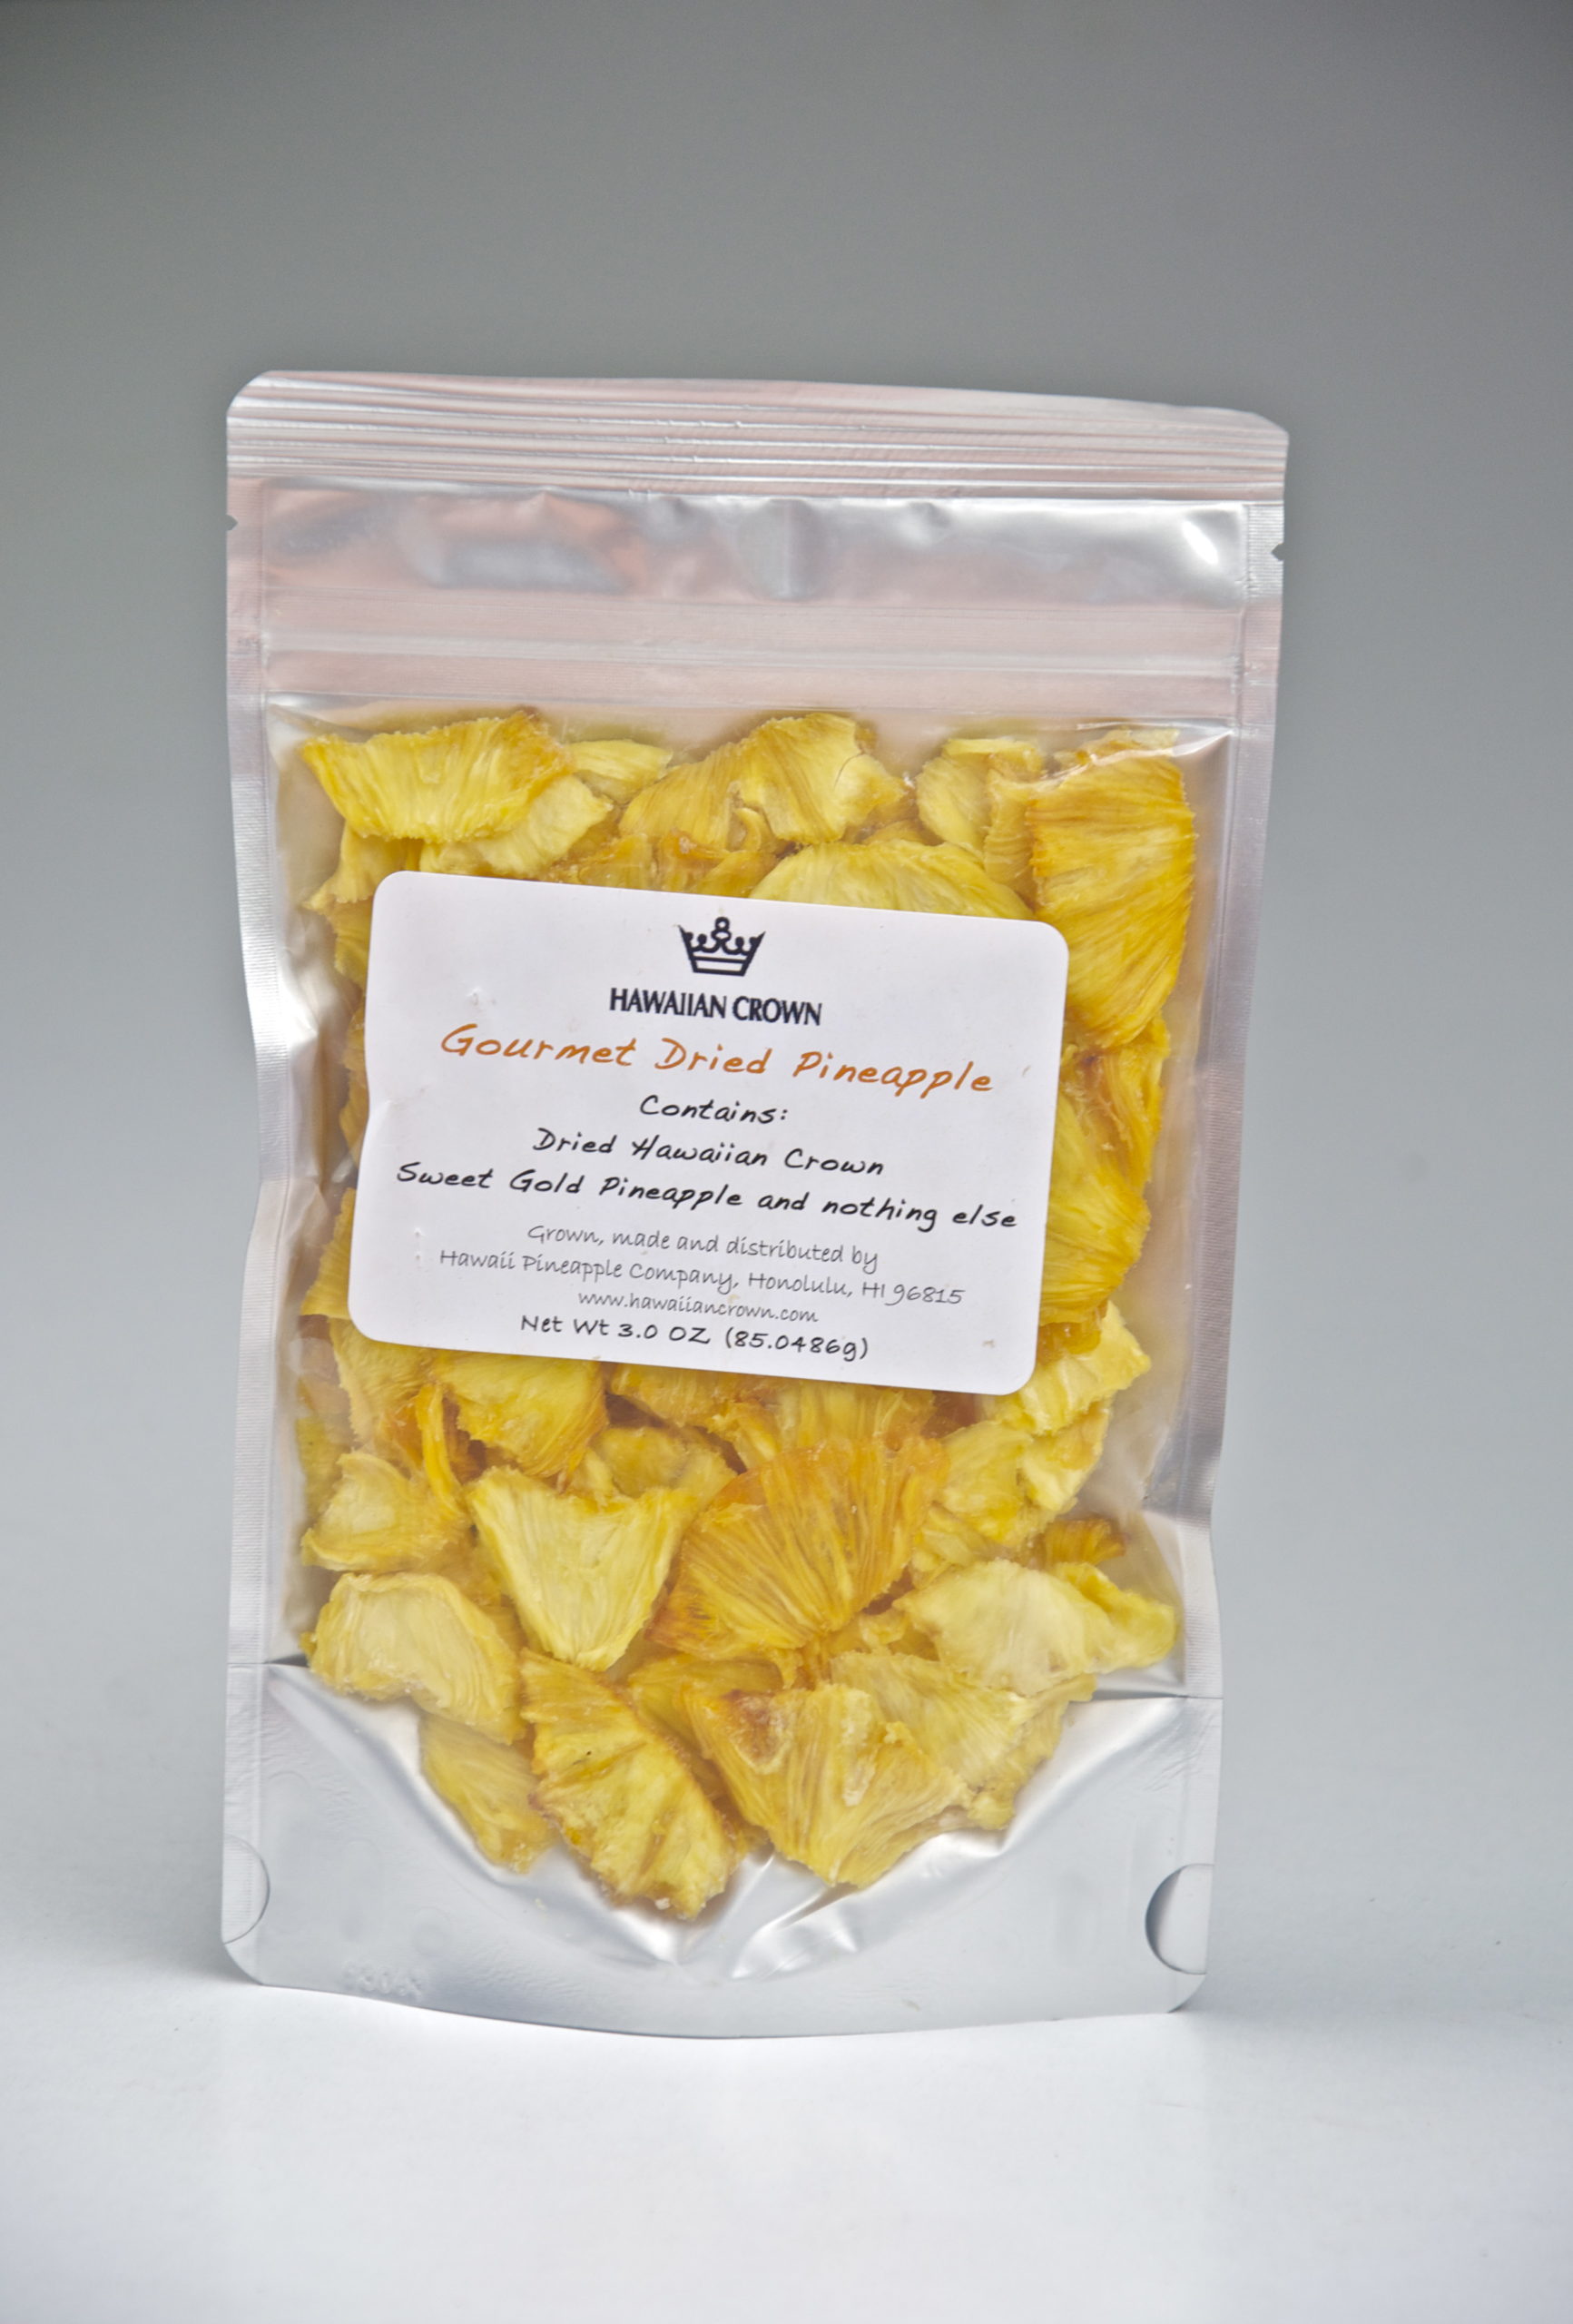 https://hawaiiancrown.com/wp-content/uploads/2014/12/Gourmet-Dried-Pineapple-2-scaled.jpg